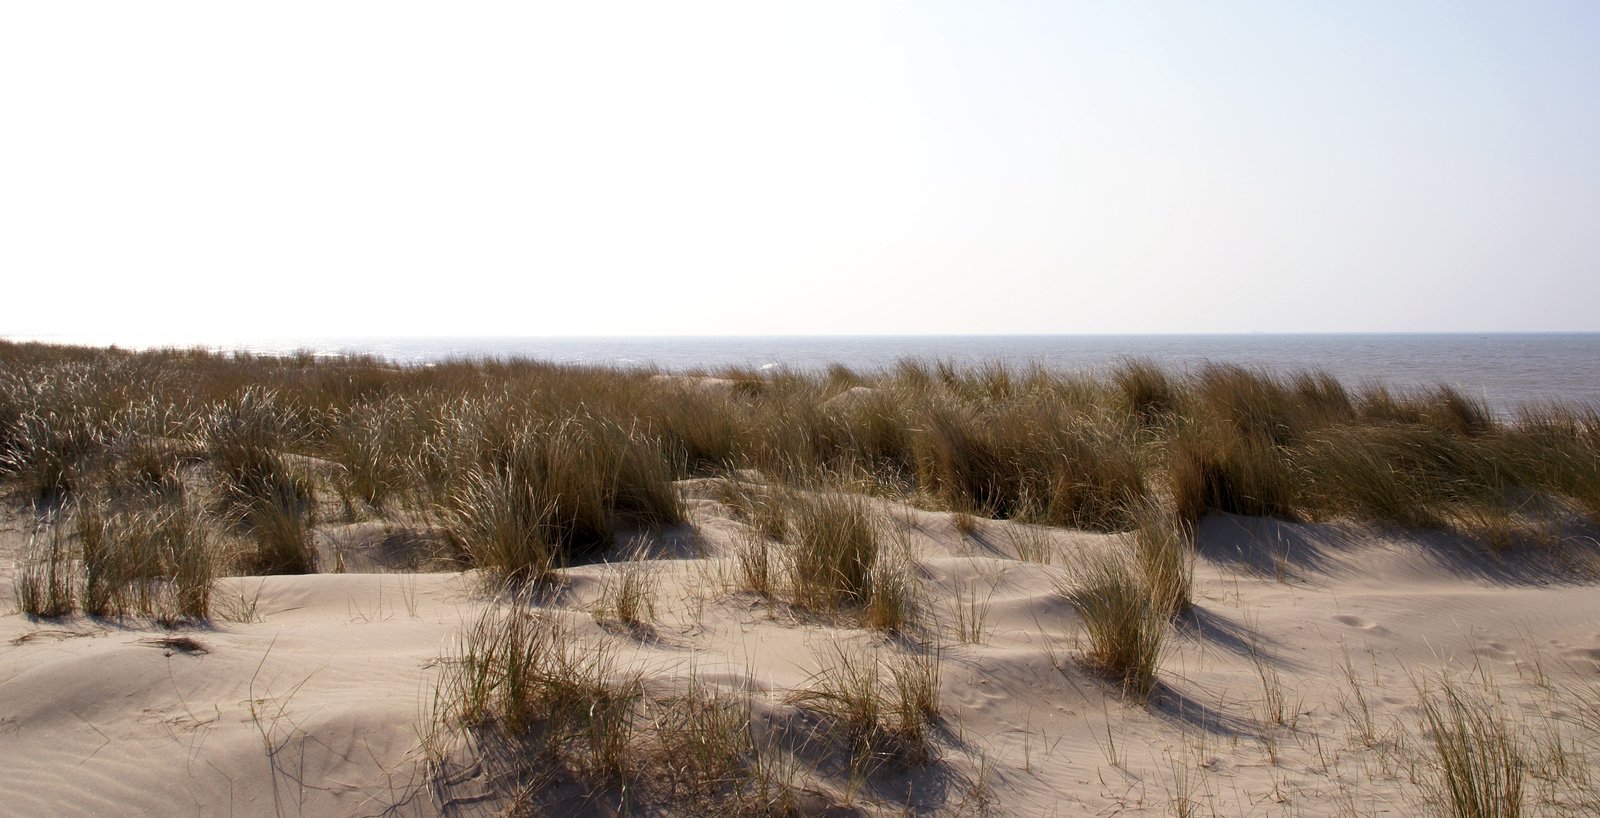 the sand dunes and plants are all along the beach